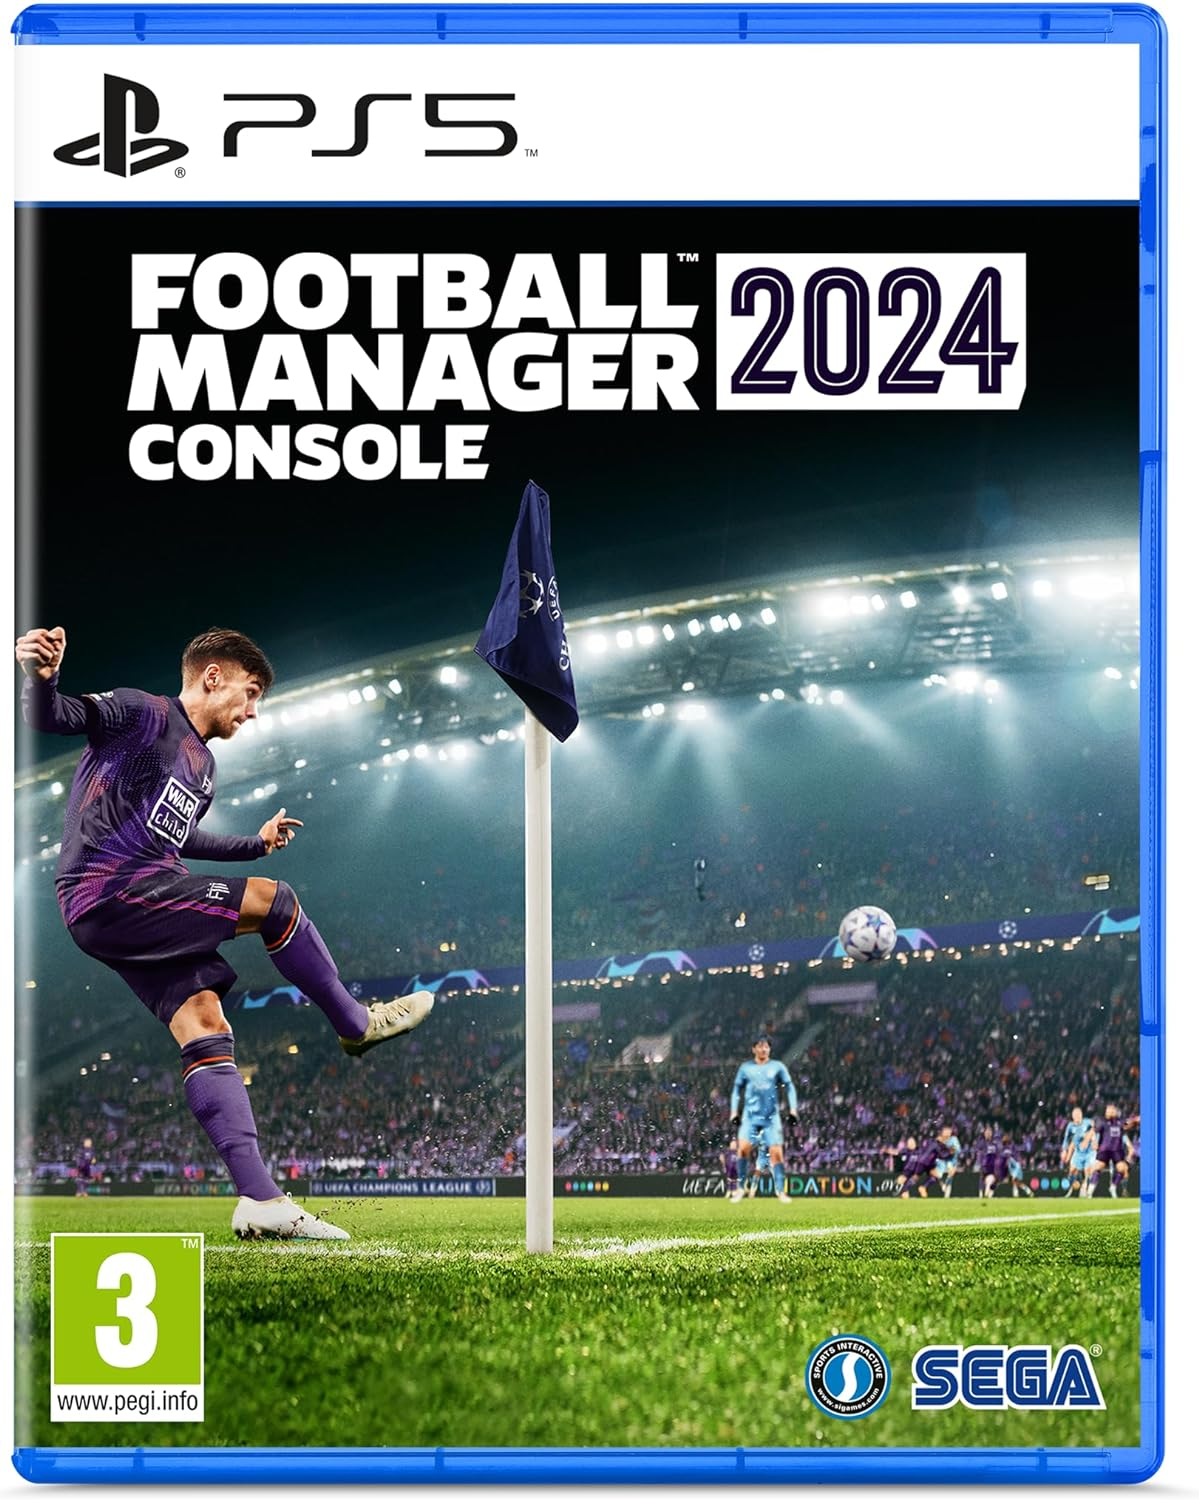 Football Manager 2024 - PS5 [New] | Yard's Games Ltd